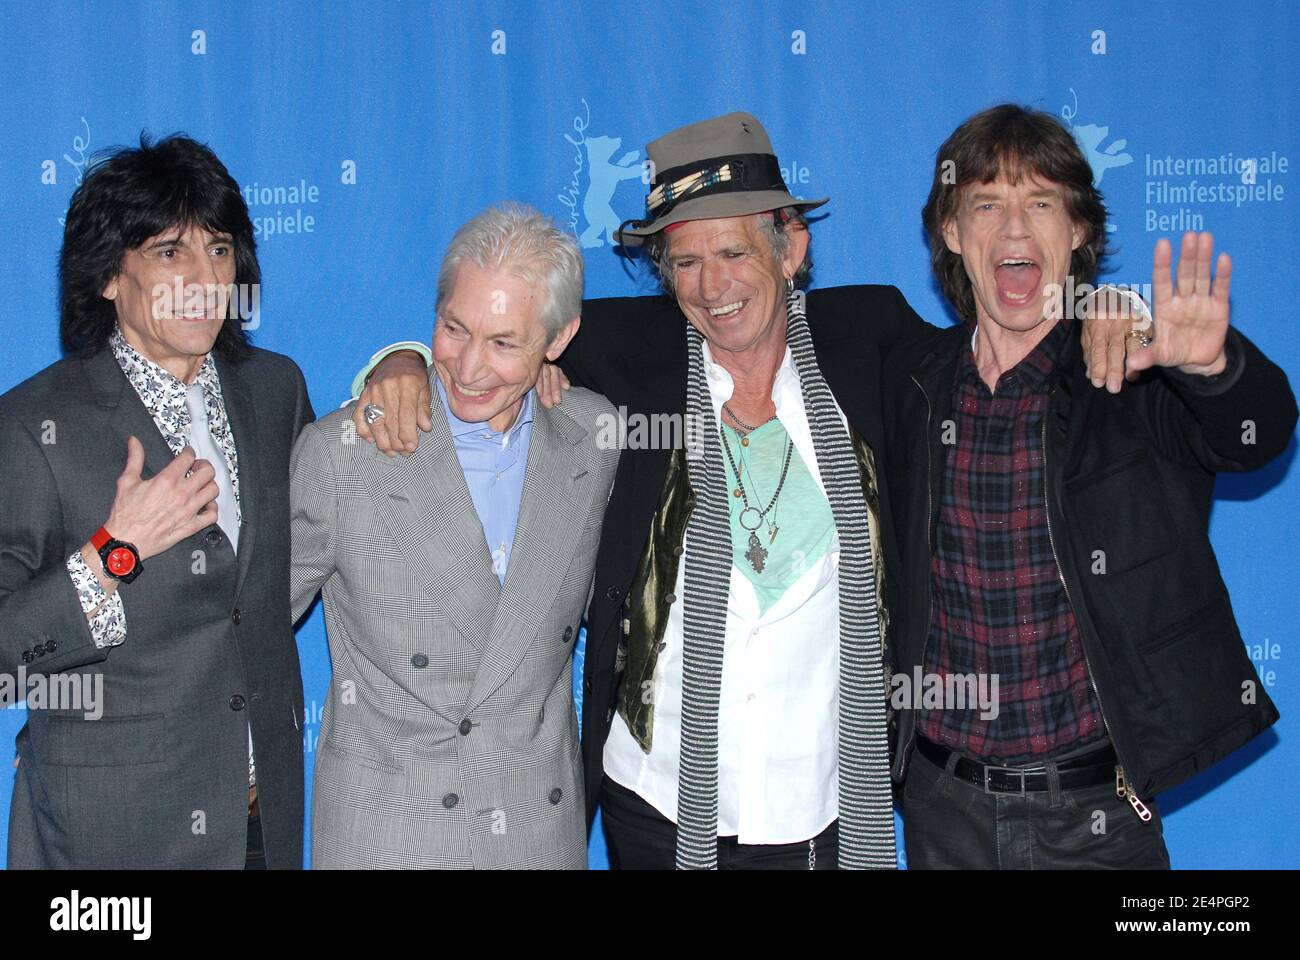 British rock legends the Rolling Stones members Mick Jagger, Keith Richards, Ron Wood and Charlie Watts pose for pictures during the photocall of their new documentary film 'Shine a Light' at the 58th annual Berlin Film Festival, in Berlin, Germany, on February 7, 2008. Photo by Nicolas Khayat/ABACAPRESS.COM Stock Photo